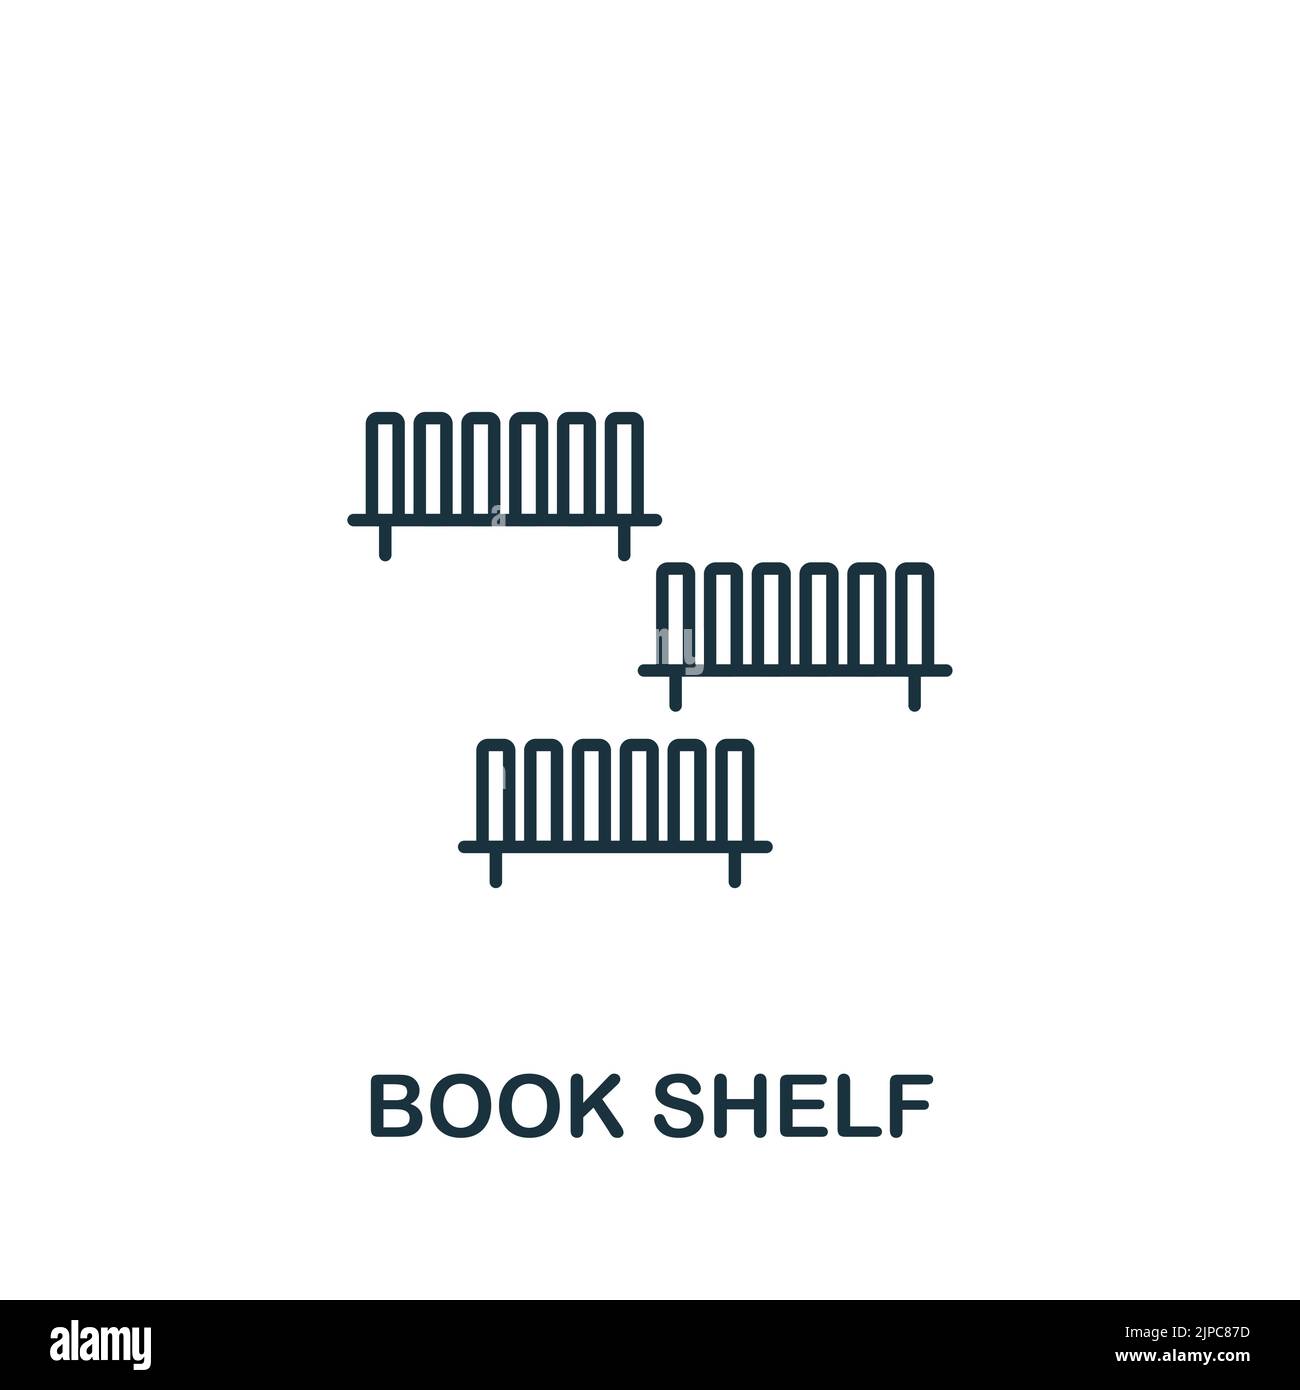 Book Shelf icon. Line simple Interior Furniture icon for templates, web design and infographics Stock Vector